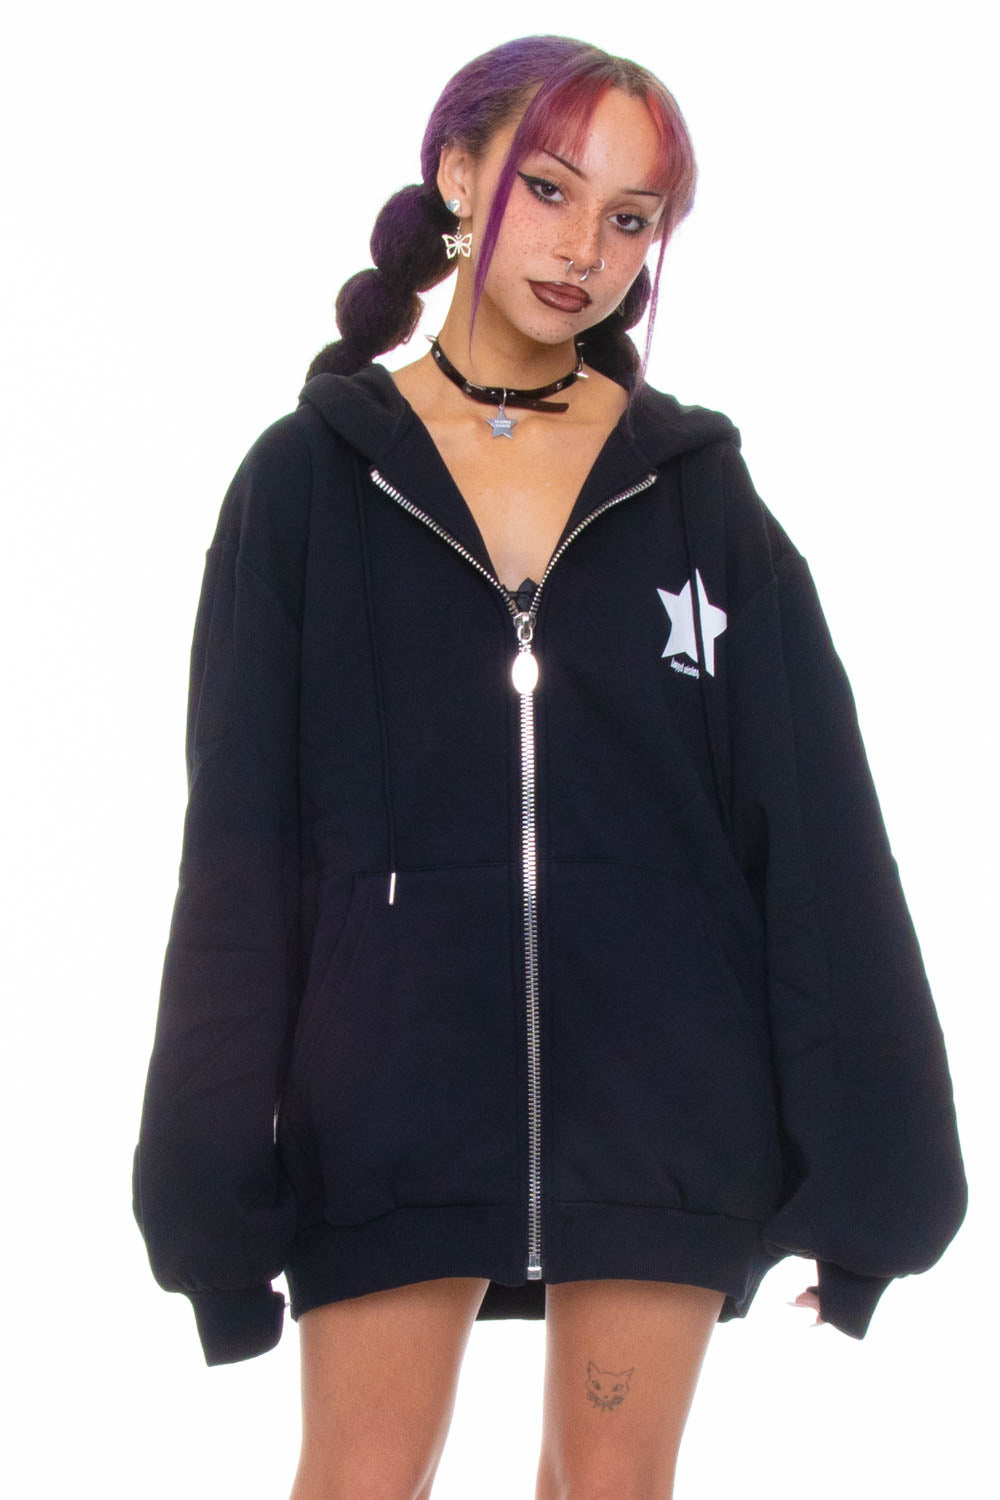 Ditch the Frumpy Look, Make Oversized Hoodie The Star